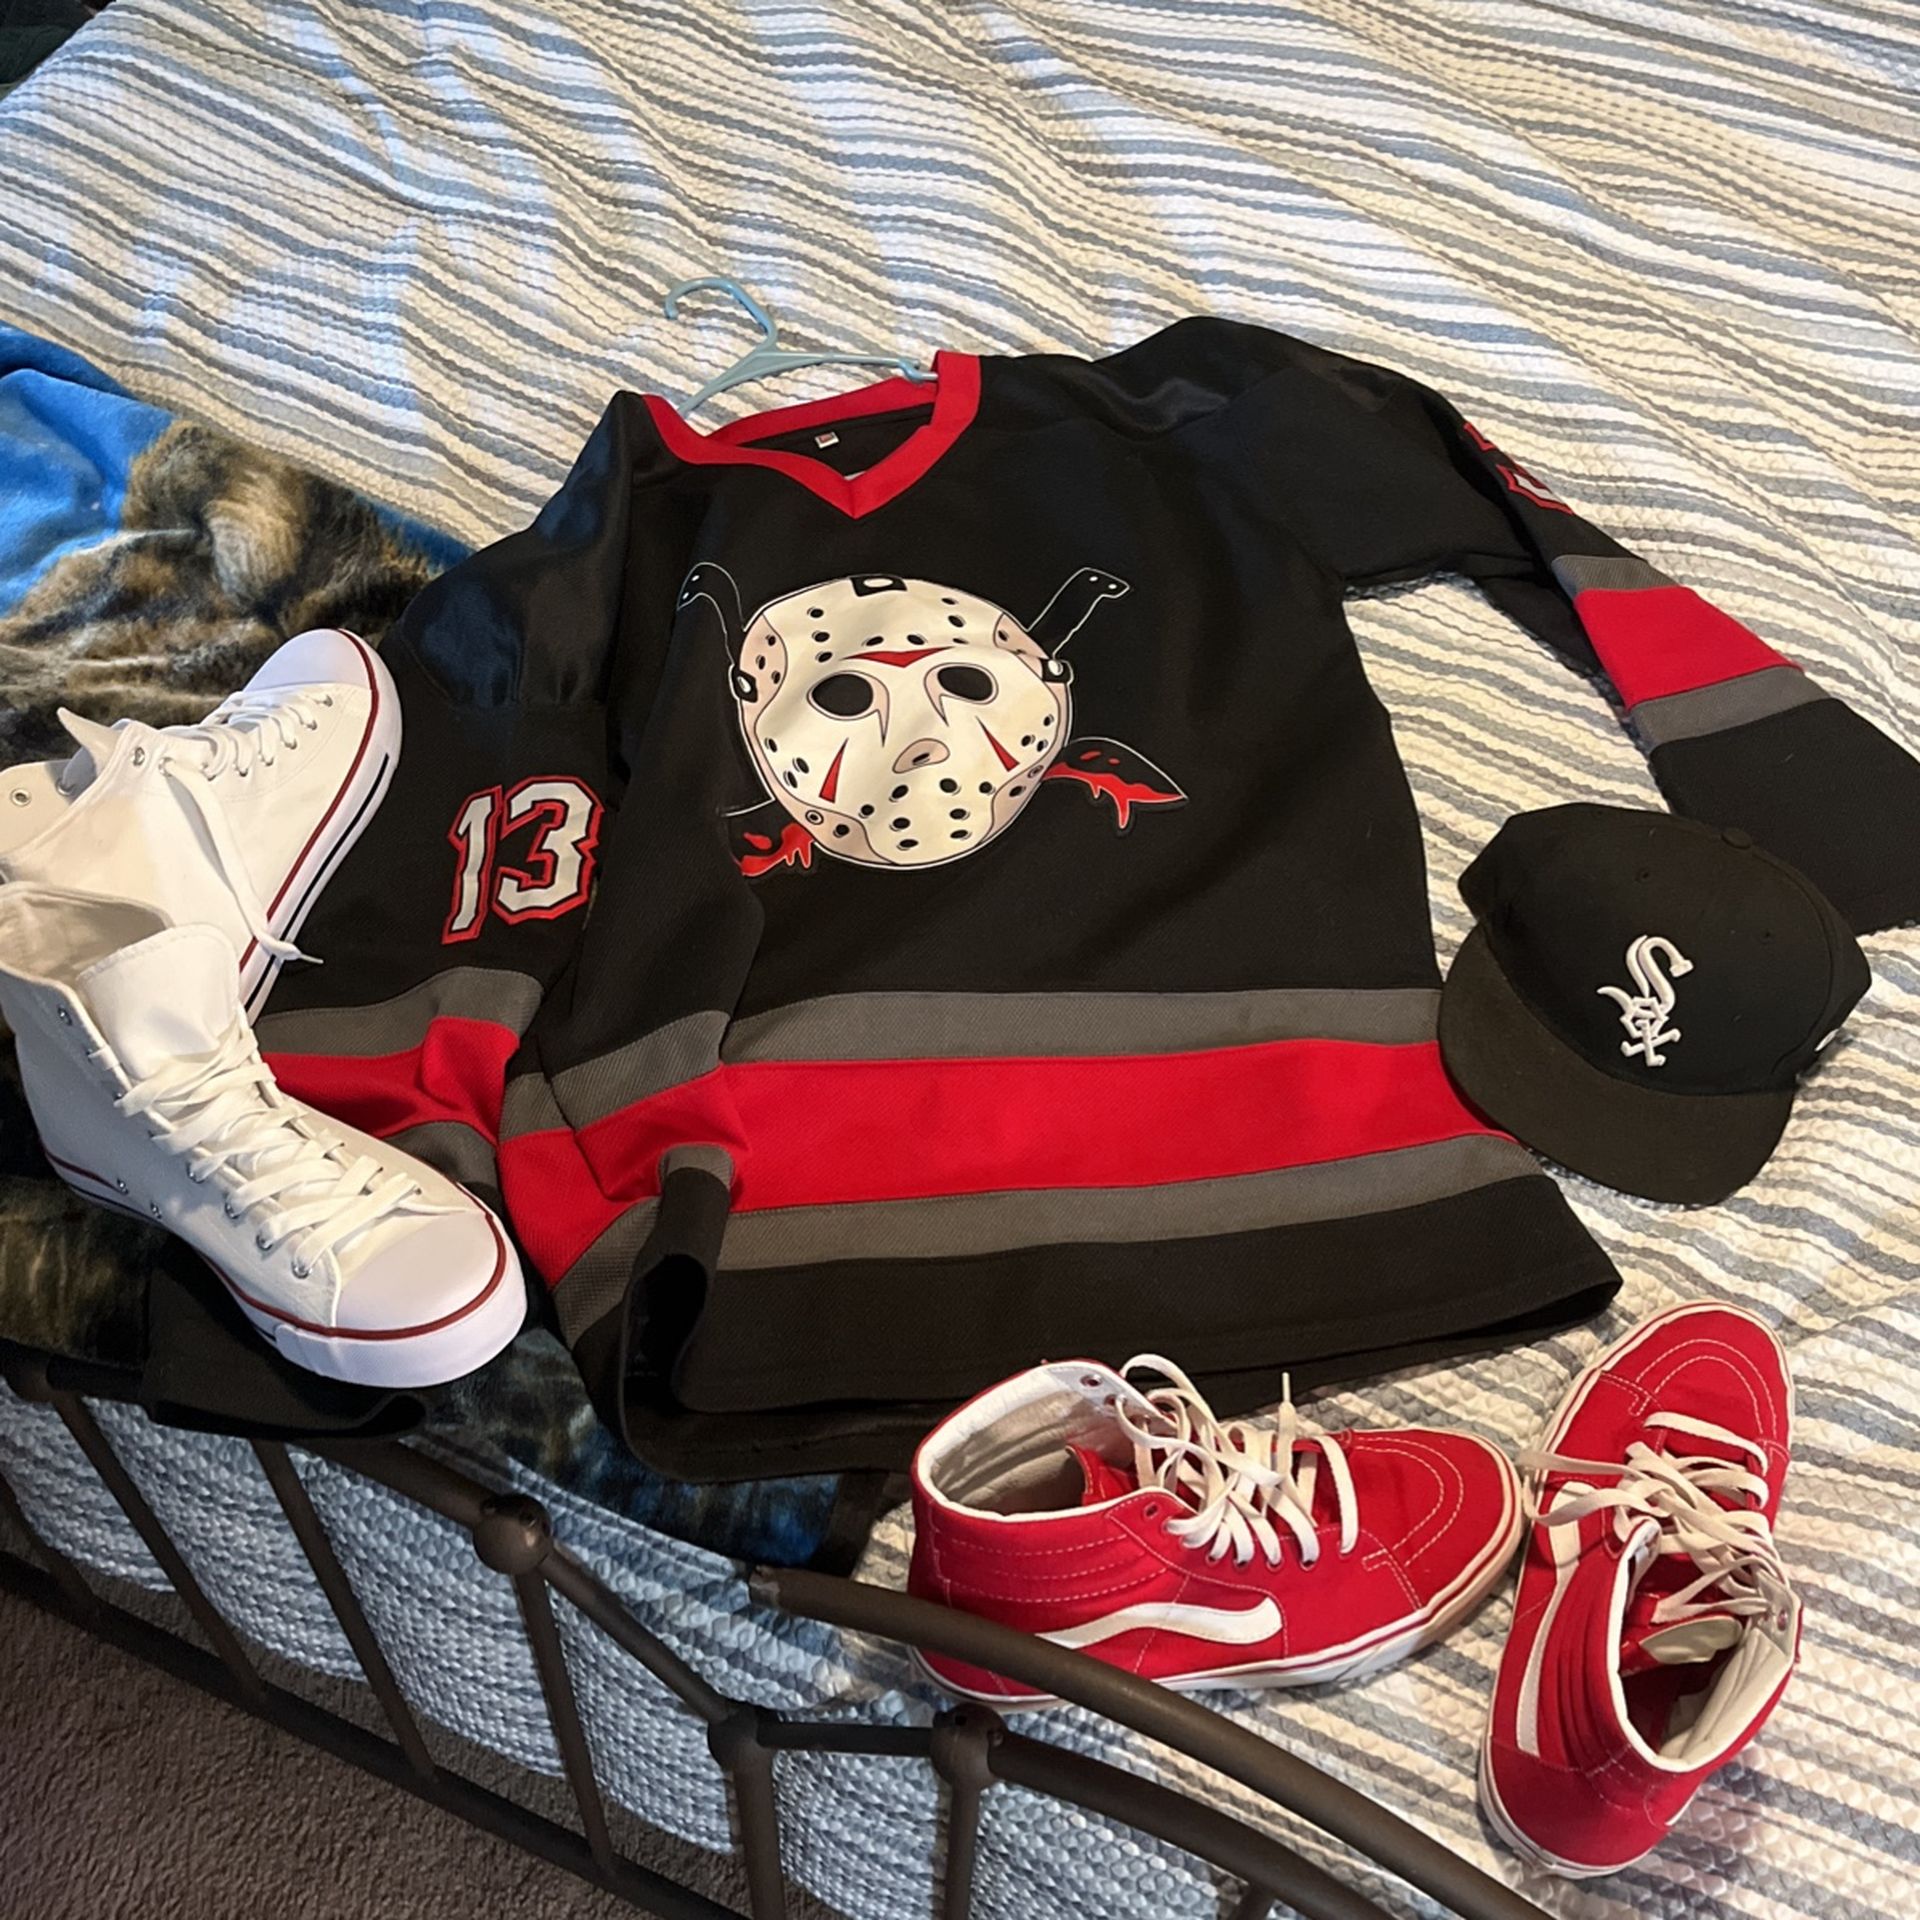 Jason Hockey Jersey Res High top Vans White Off brand Converse White Sox Hat